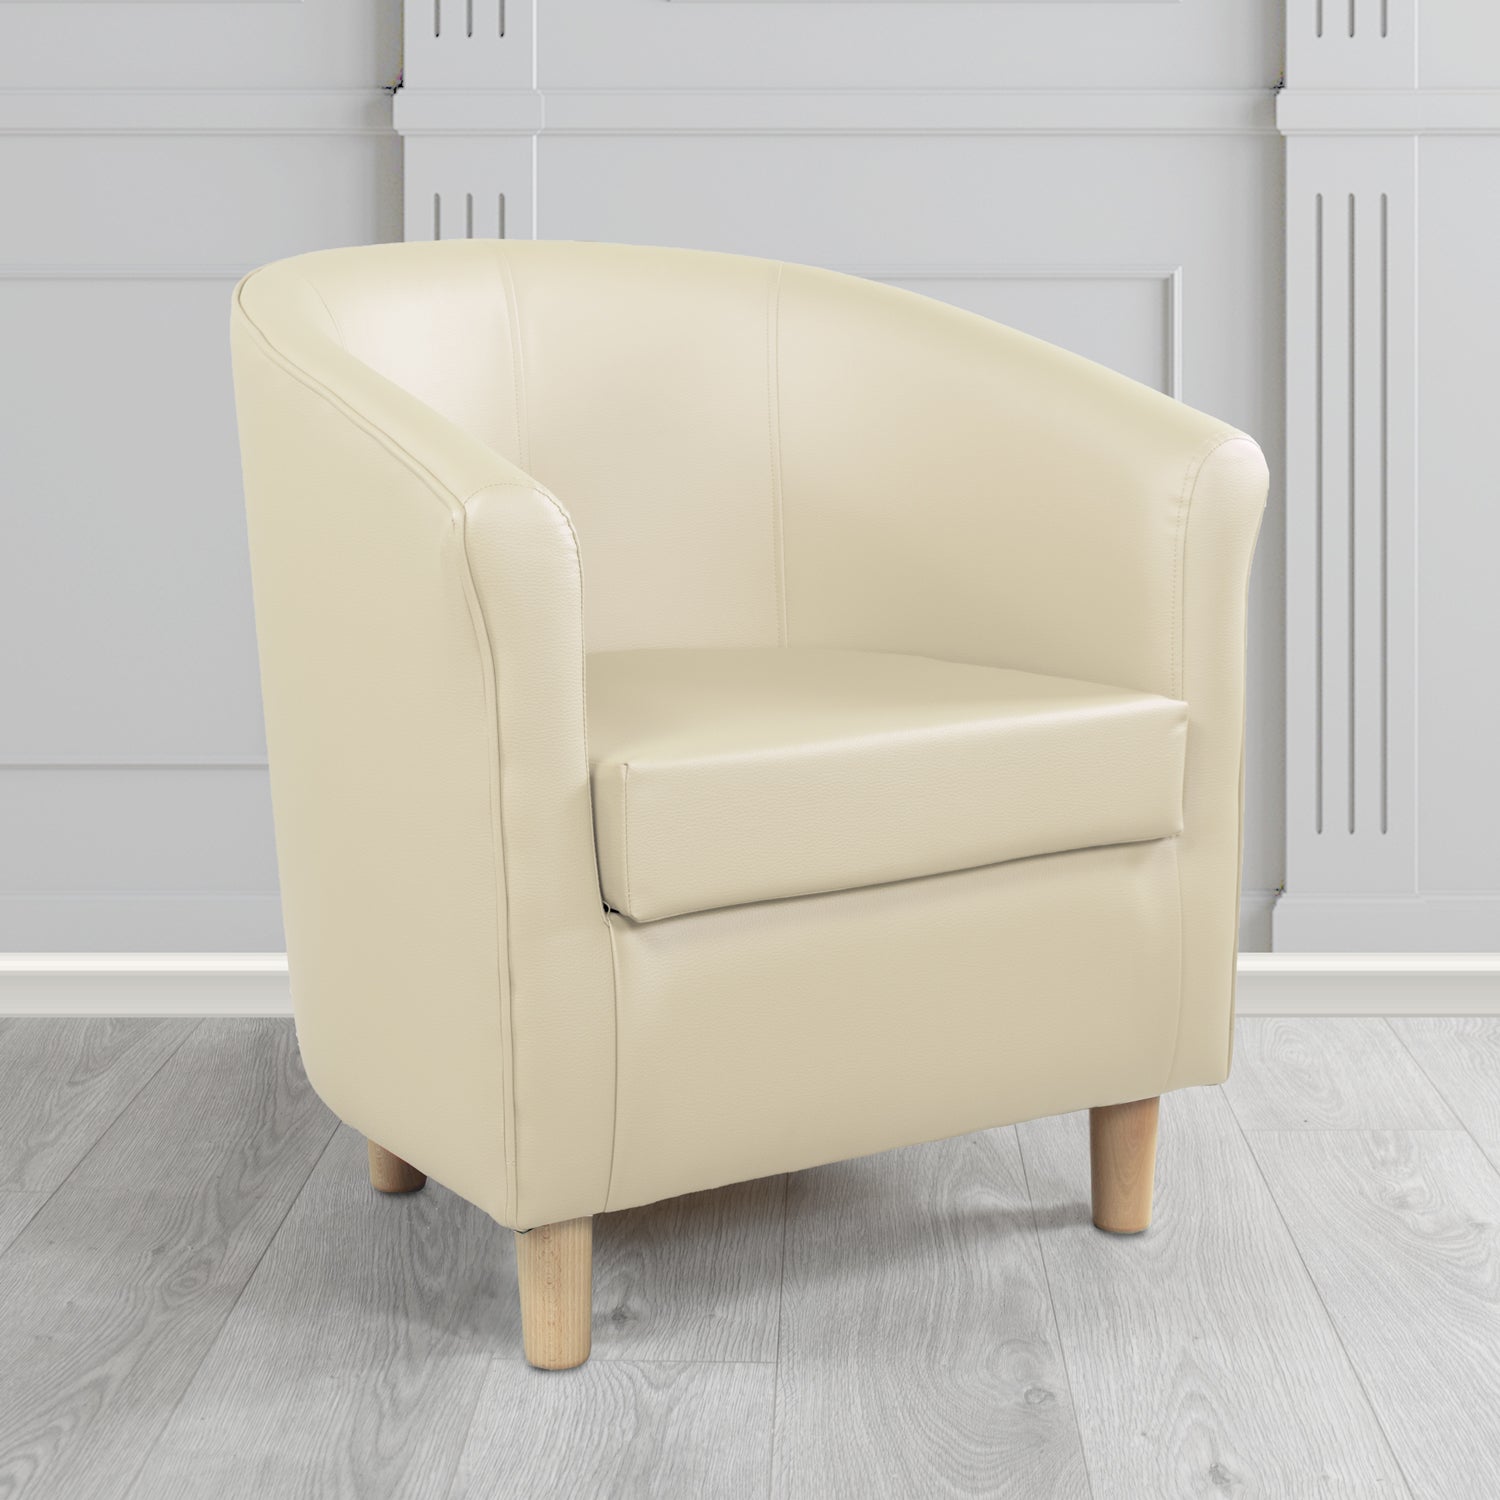 Tuscany Tub Chair in Madrid Cream Faux Leather